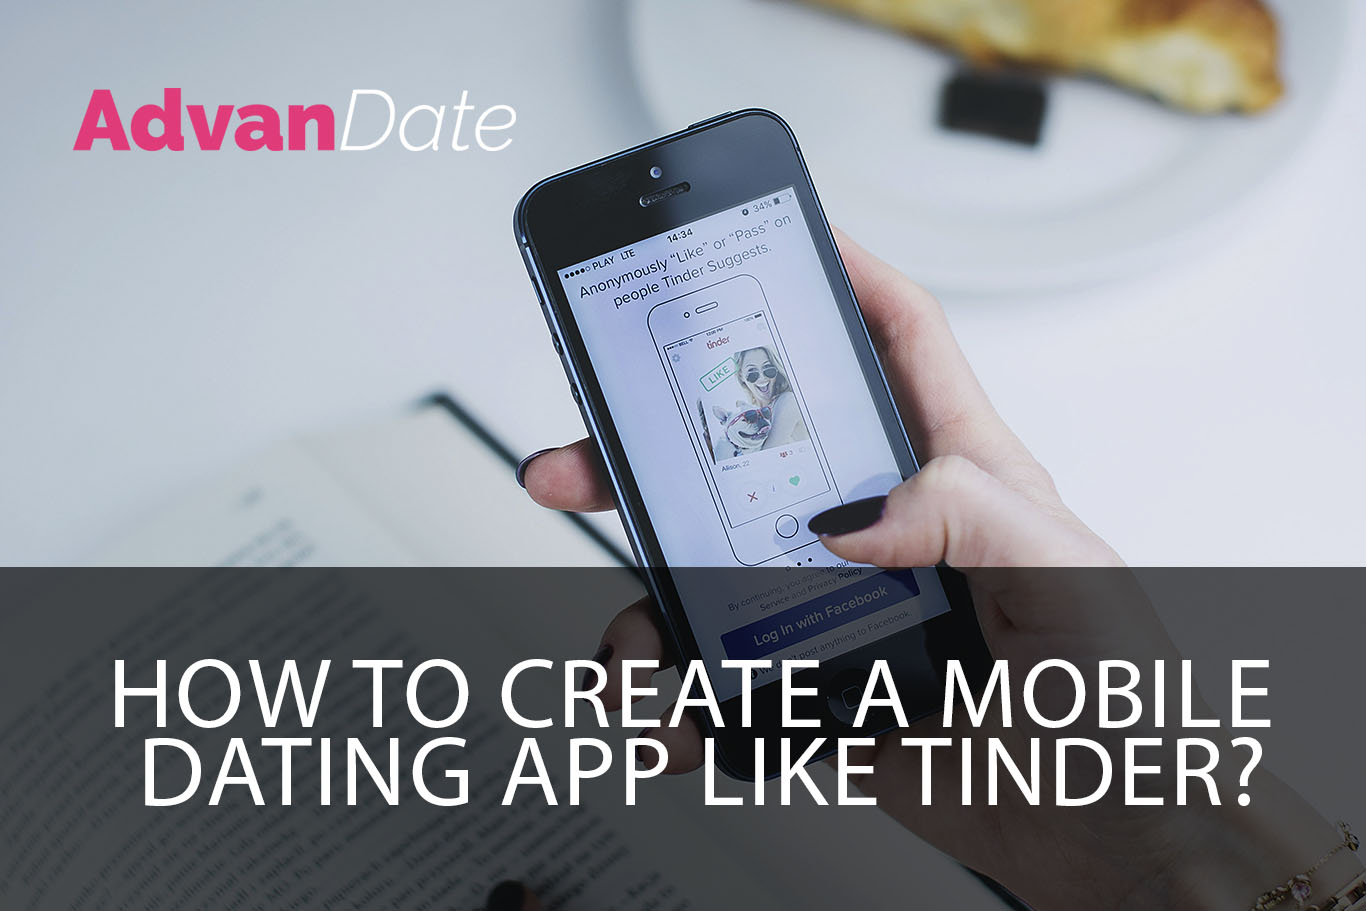 How to create a Mobile Dating App like Tinder?